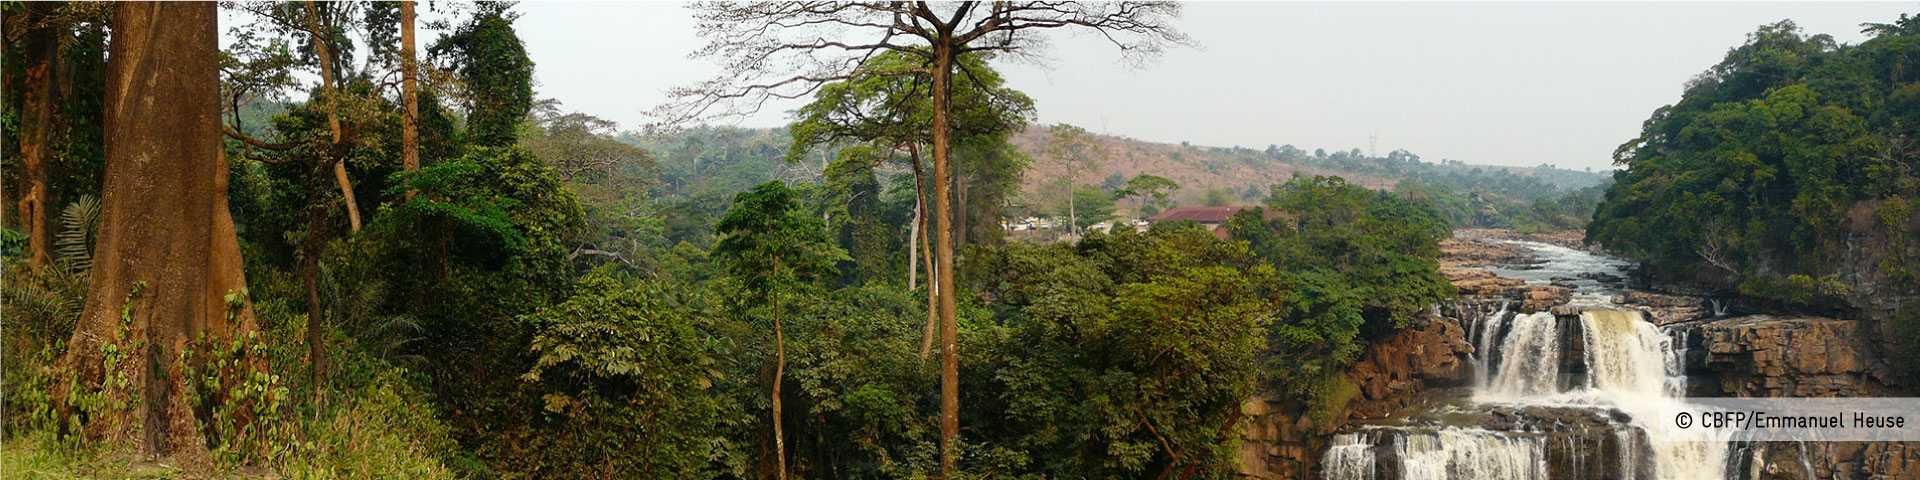 A hilly landscape in the Congo Basin with rainforest and a waterfall.